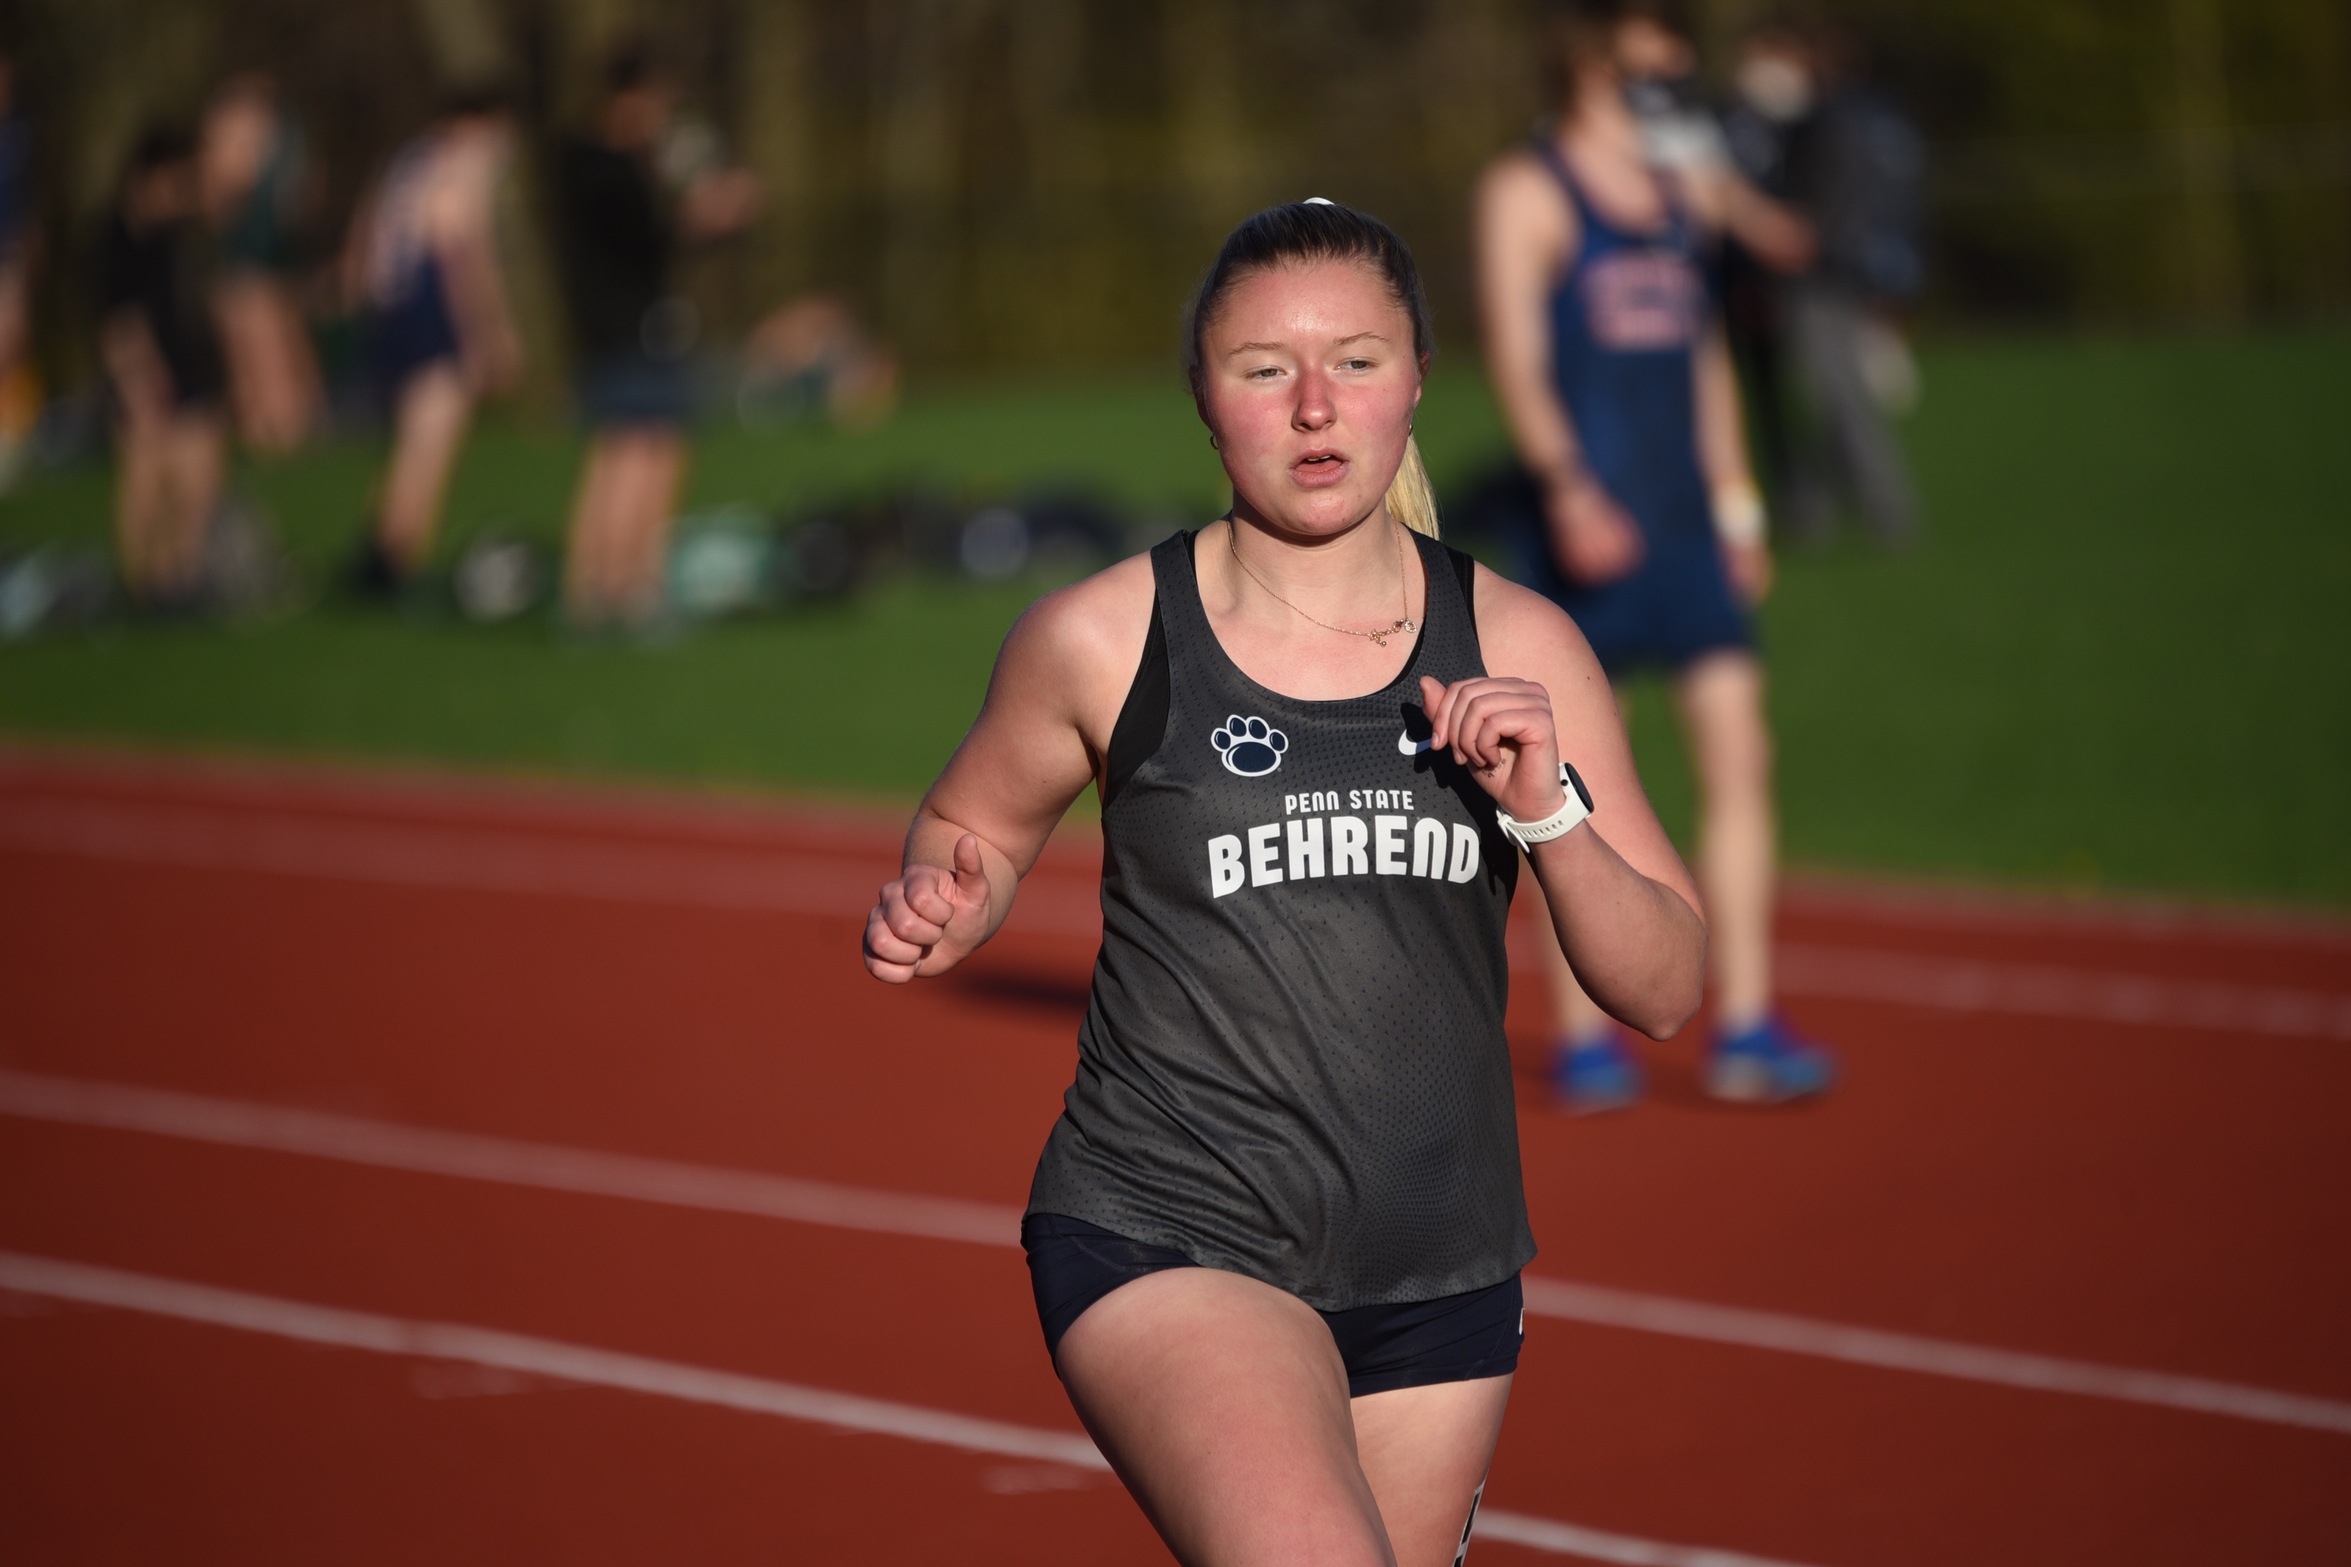 Women's Track and Field Resumes Action With Multiple Career Highs